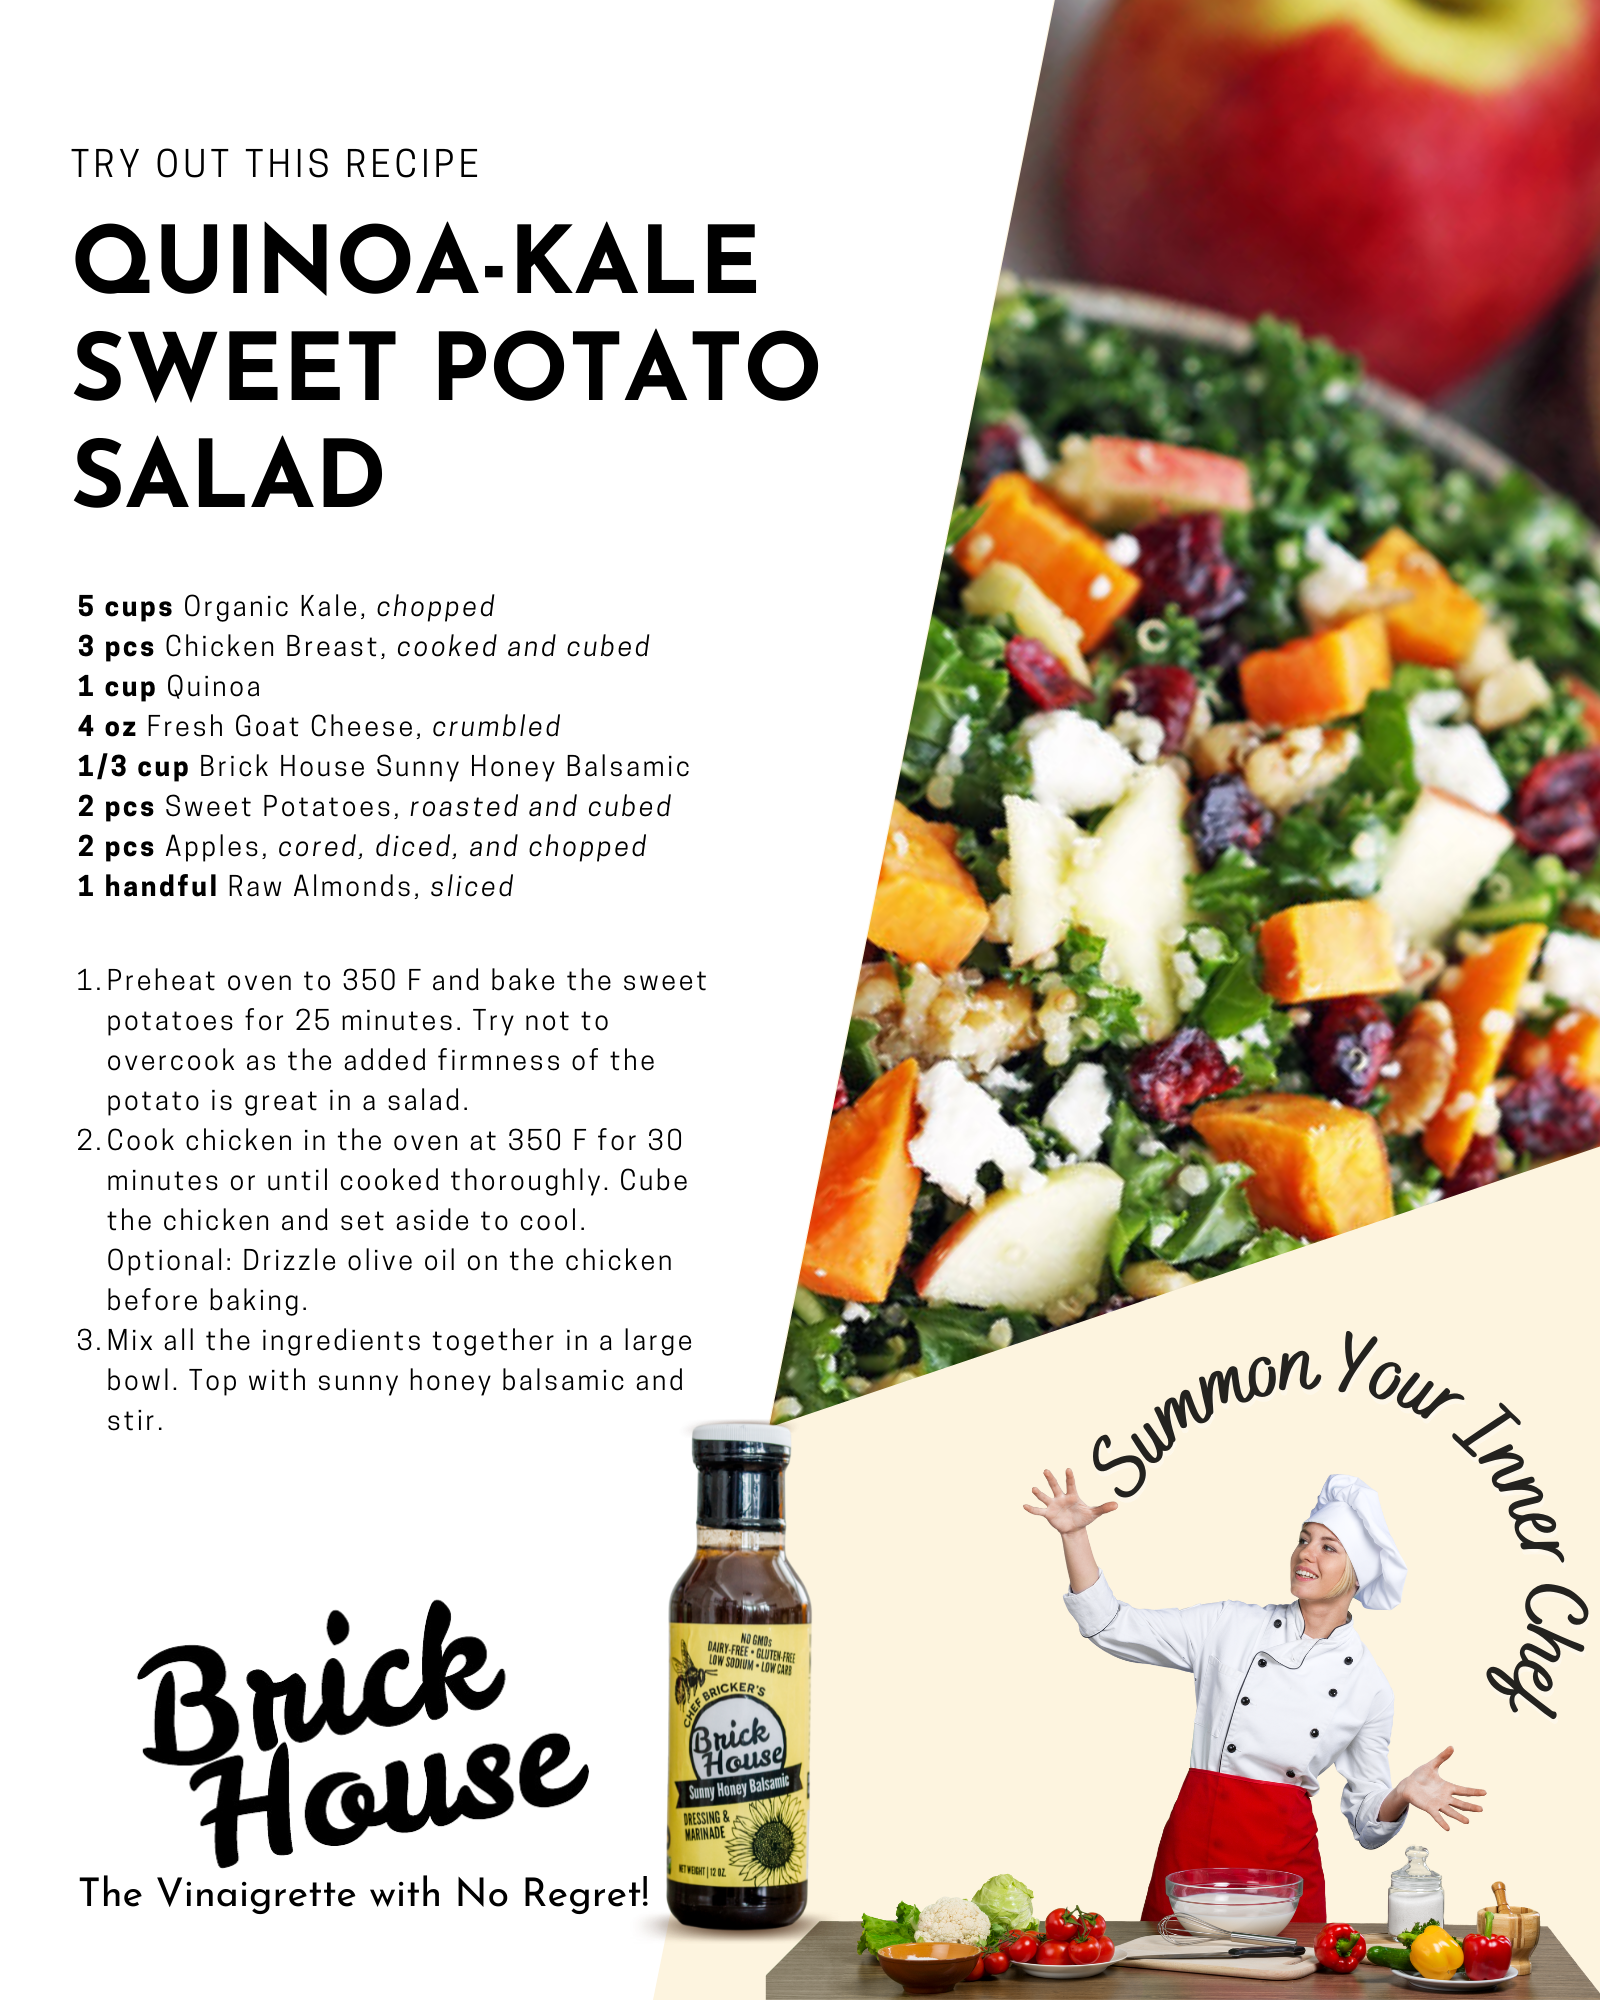 The Brick Castle: Dressing your salad with Oxo Good Grips and